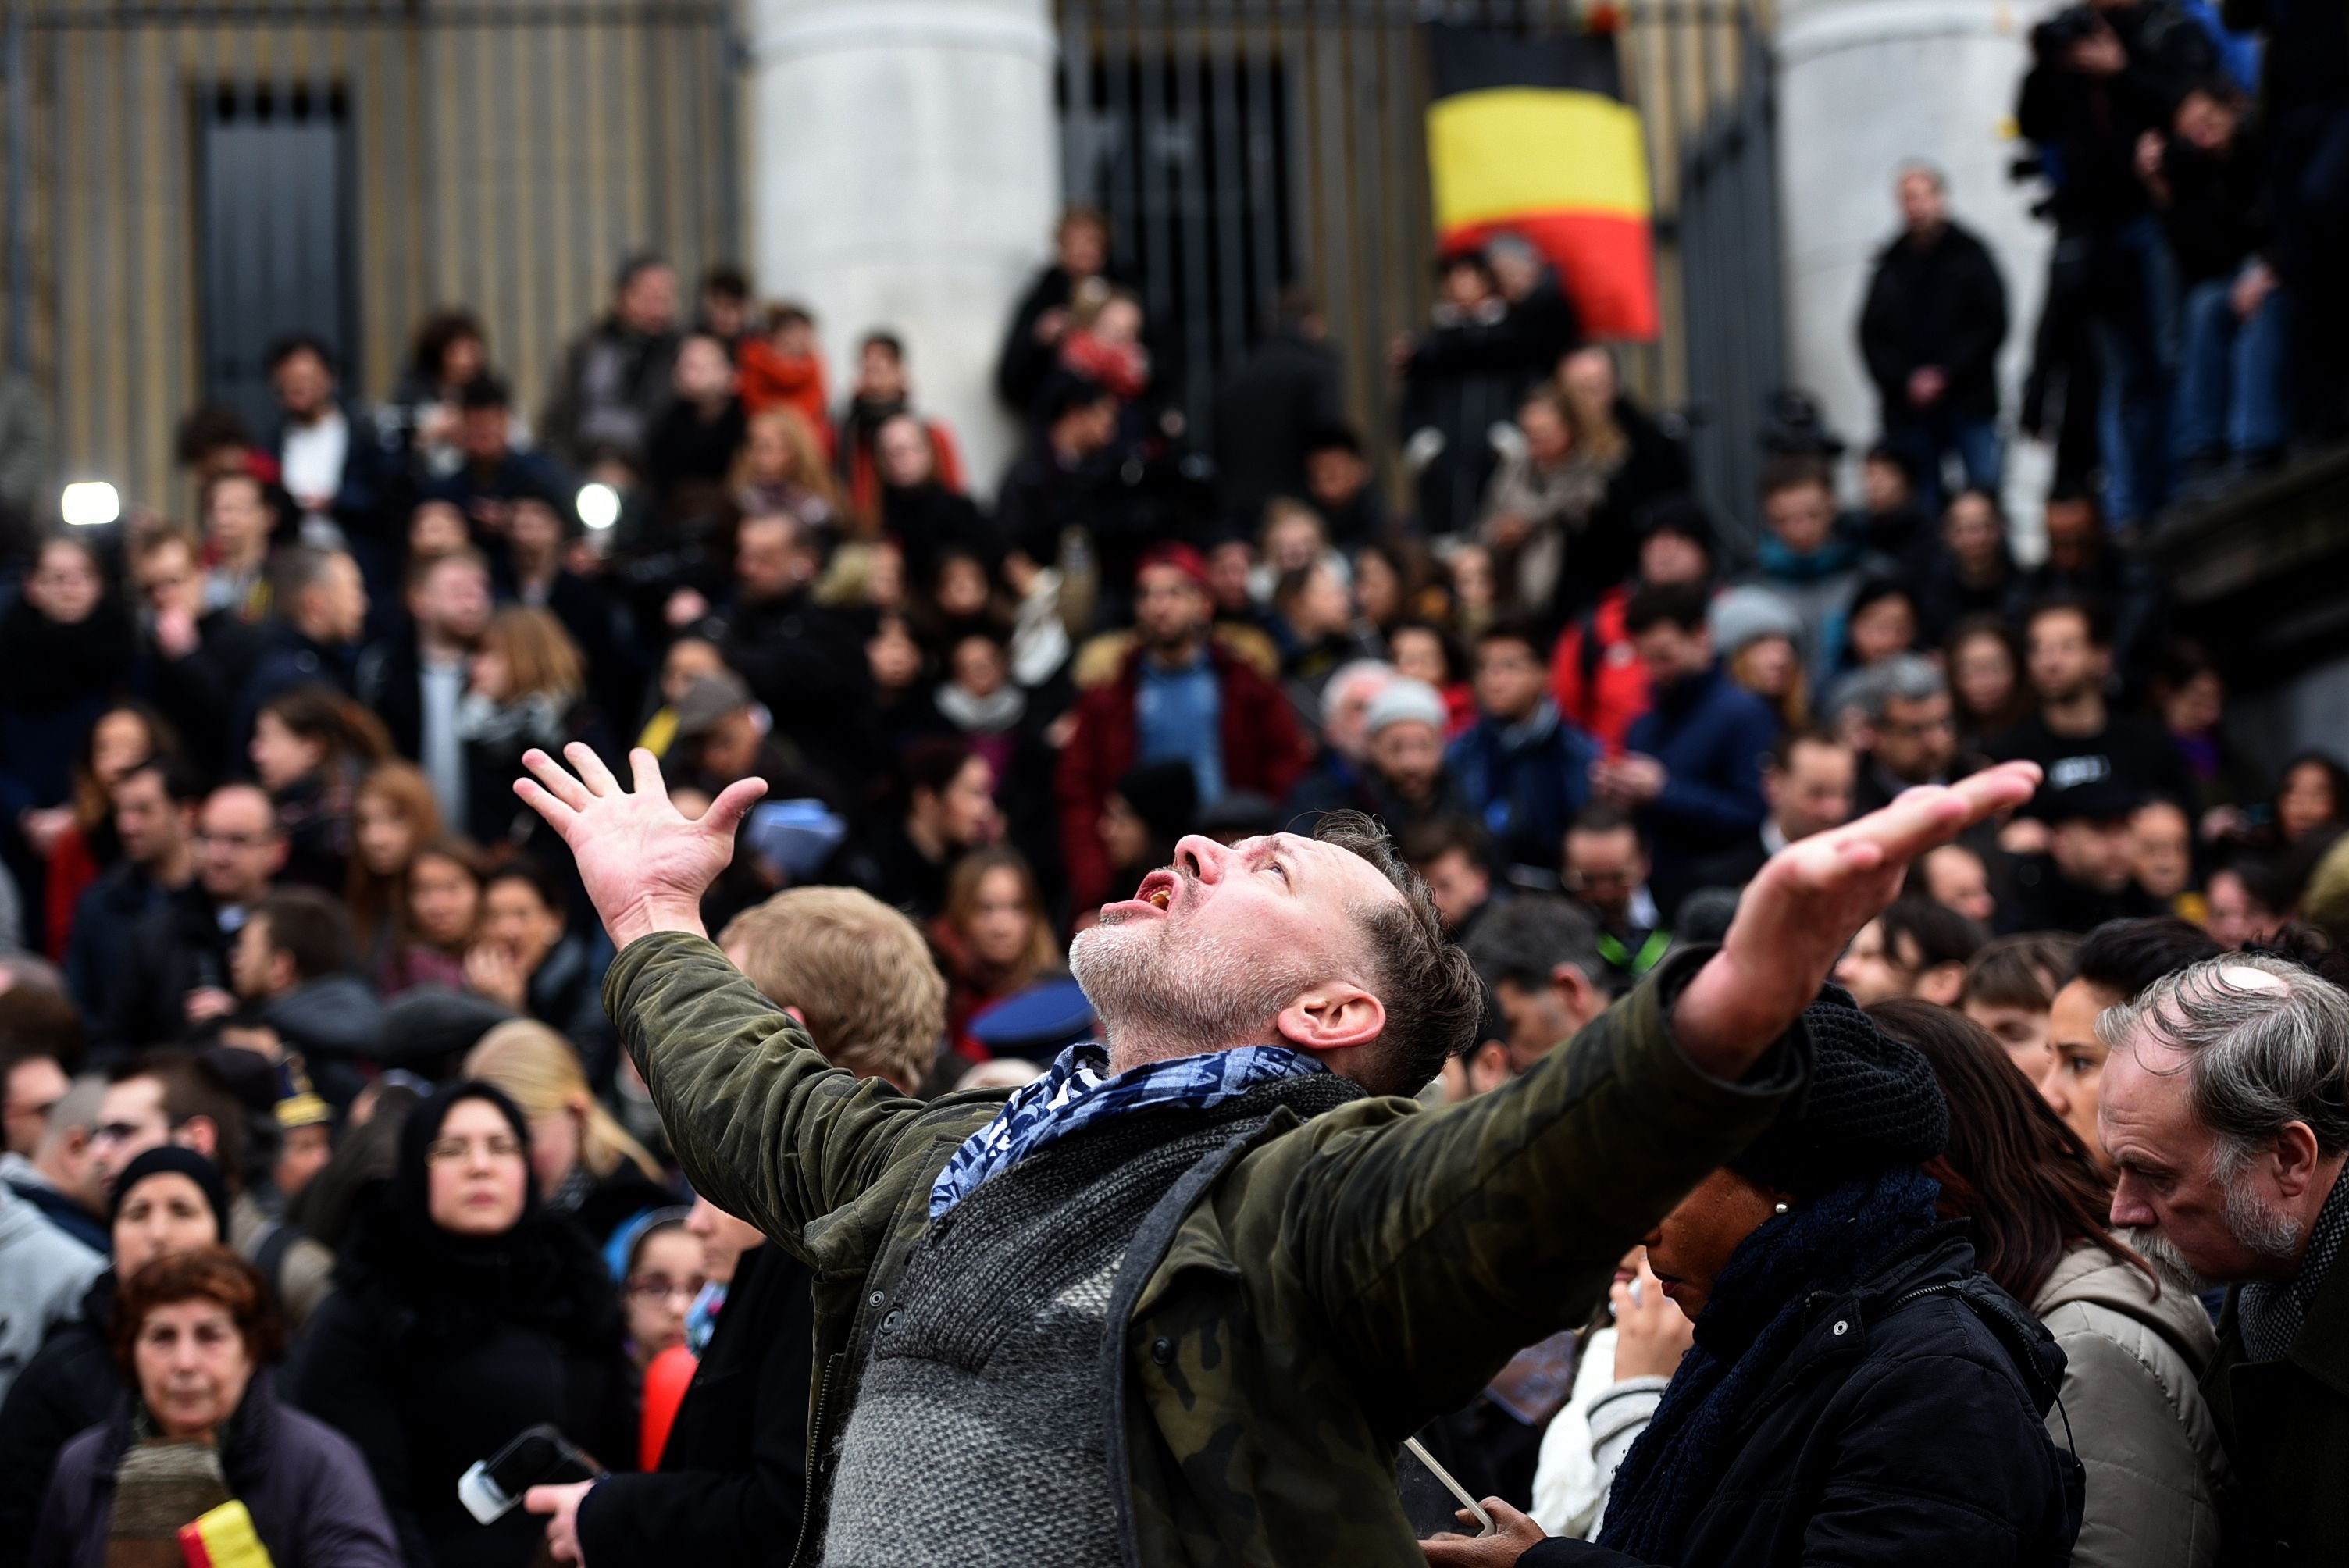 A man reacts as people gather to observe a minute of silence in memory of the victims of the Brussels airport and metro bombings, on March 23, 2016. (Patrik Syollarz—AFP/Getty Images)